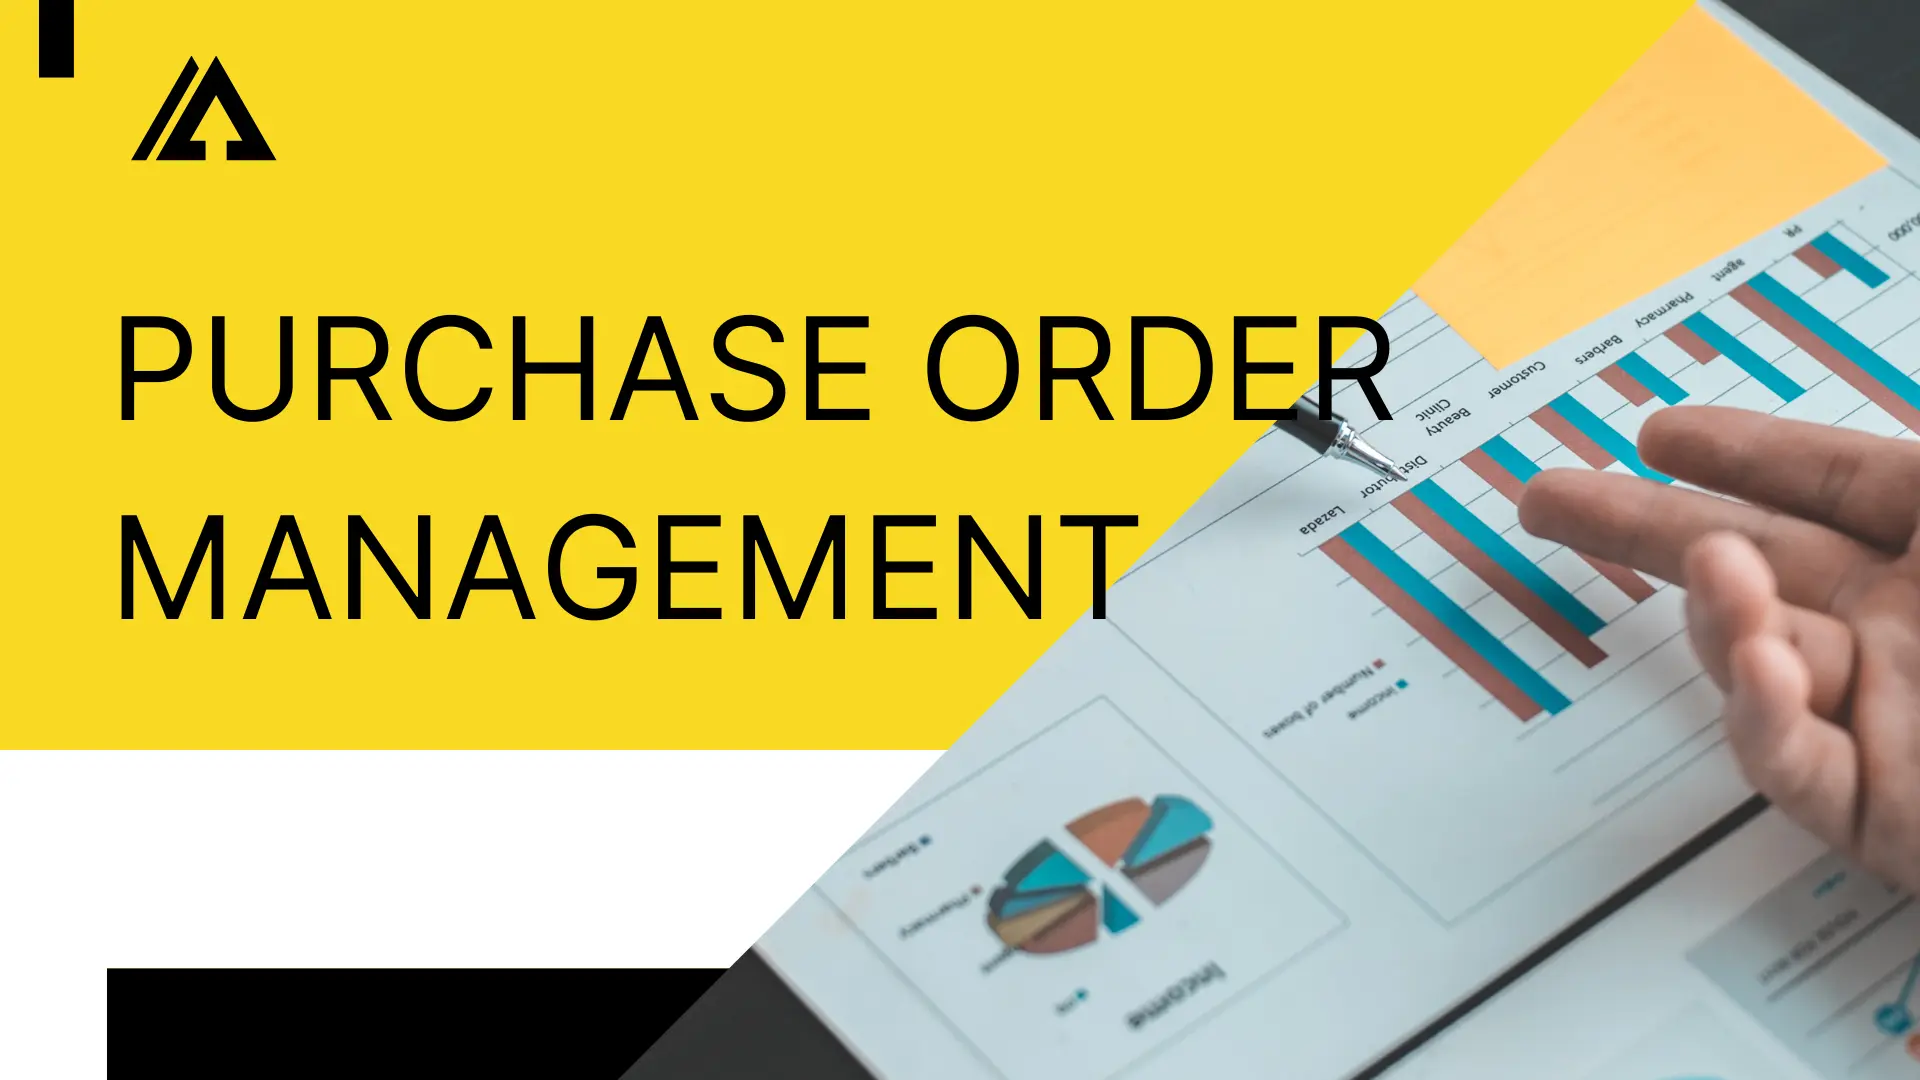 What is purchase order management?